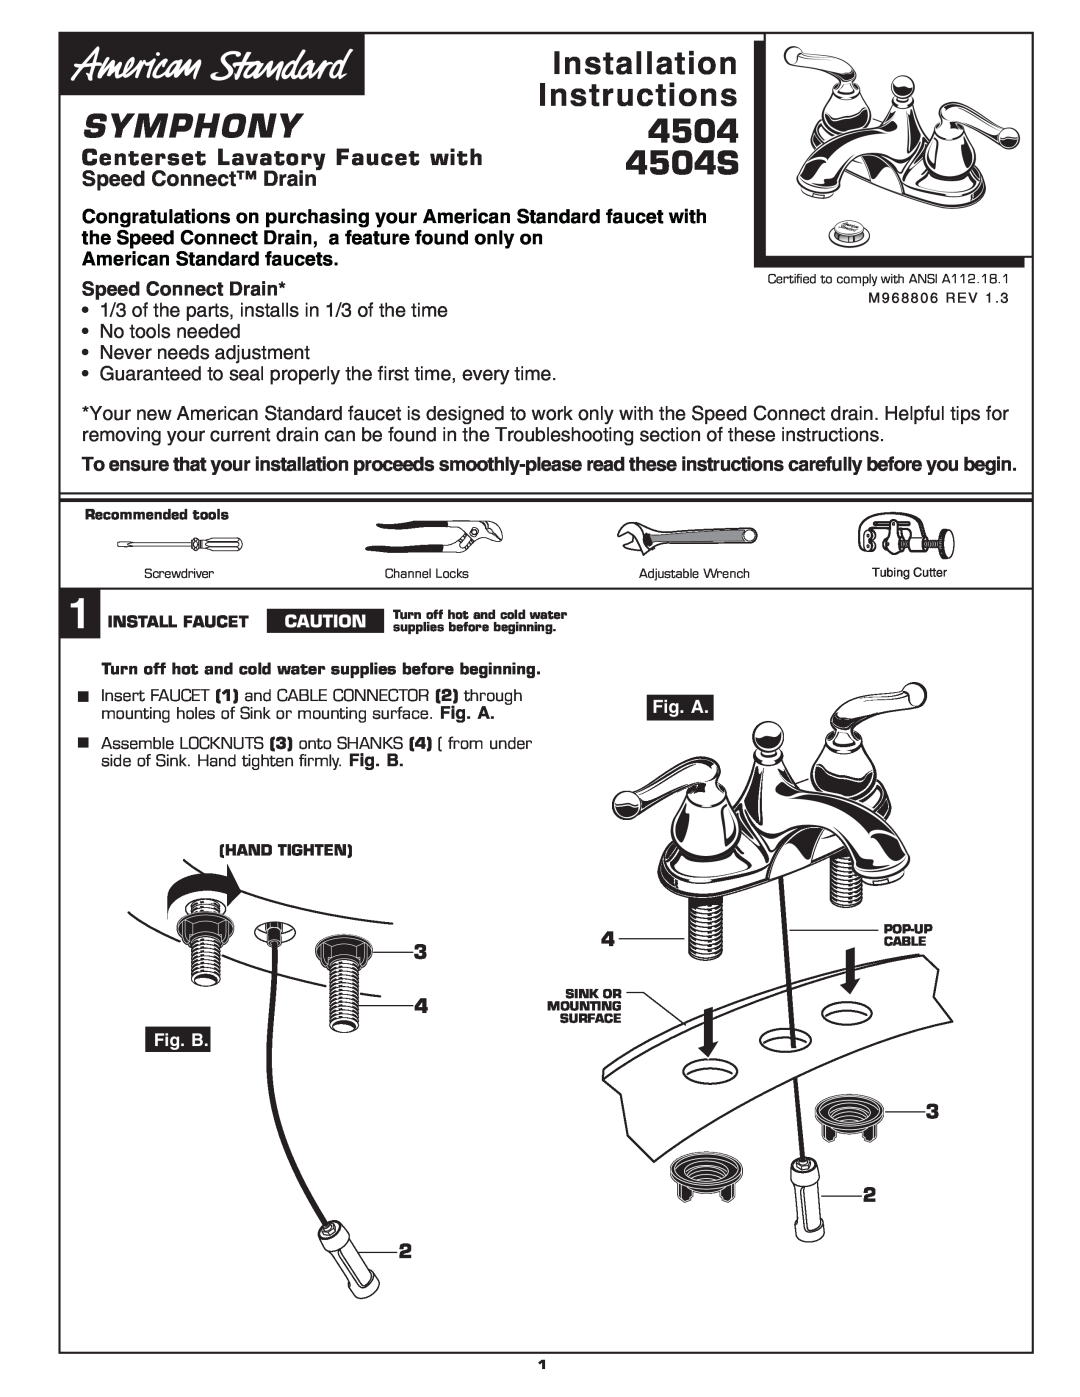 American Standard 4504S installation instructions Installation, Symphony, Instructions, American Standard faucets, Fig. A 